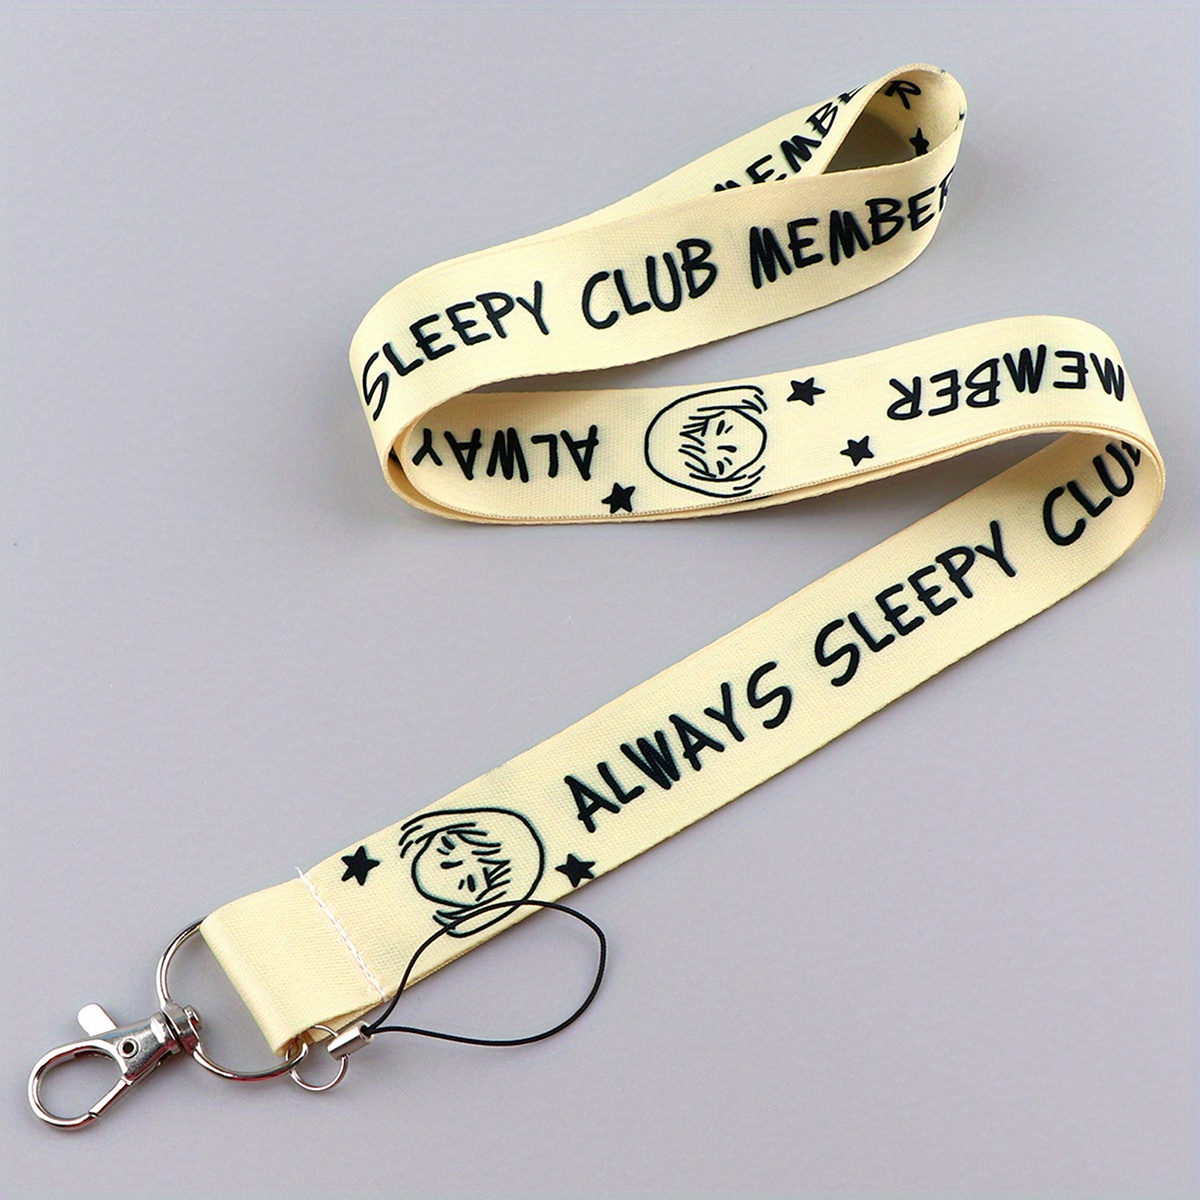 ALWAYS SLEEPY CLUB Neck Strap Lanyards for Keys Keychain Badge Holder ID  Hang Rope Lariat Phone Charm Accessories Detachable 1 pc